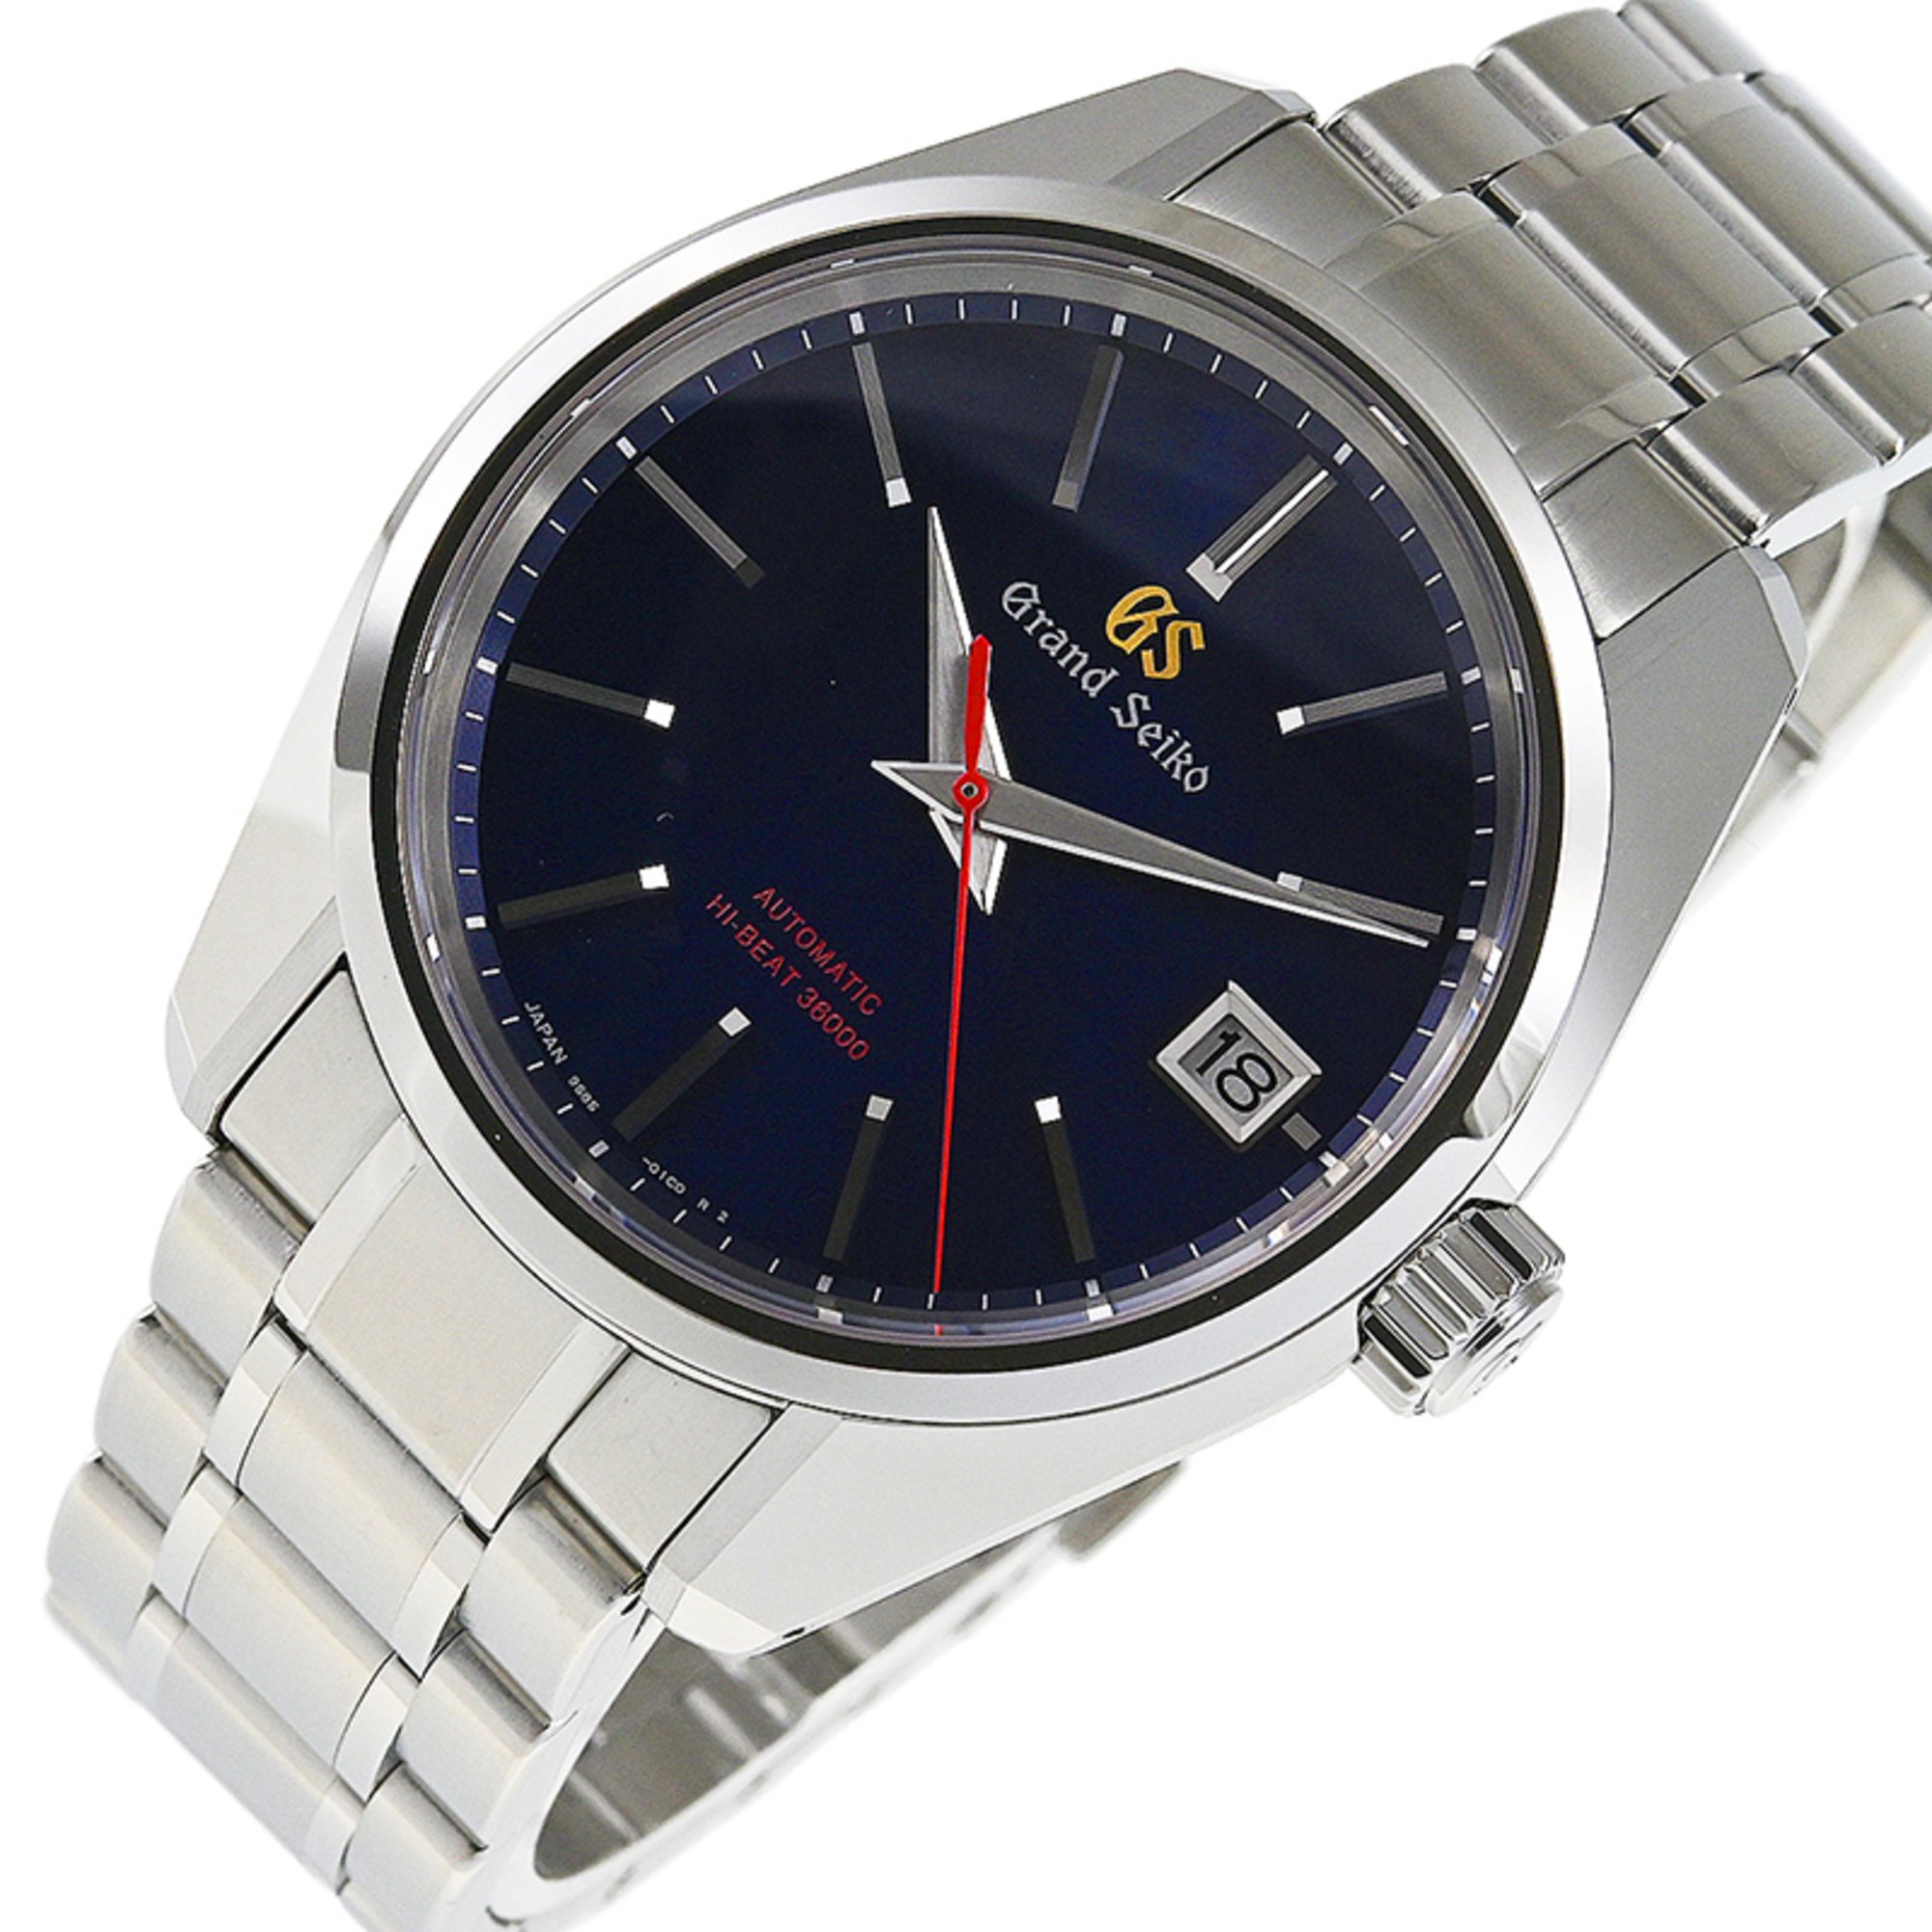 SEIKO Grand Seiko 60th Anniversary Limited Model Heritage Collection Mechanical High Beat 36000 1500 Watch SBGH281